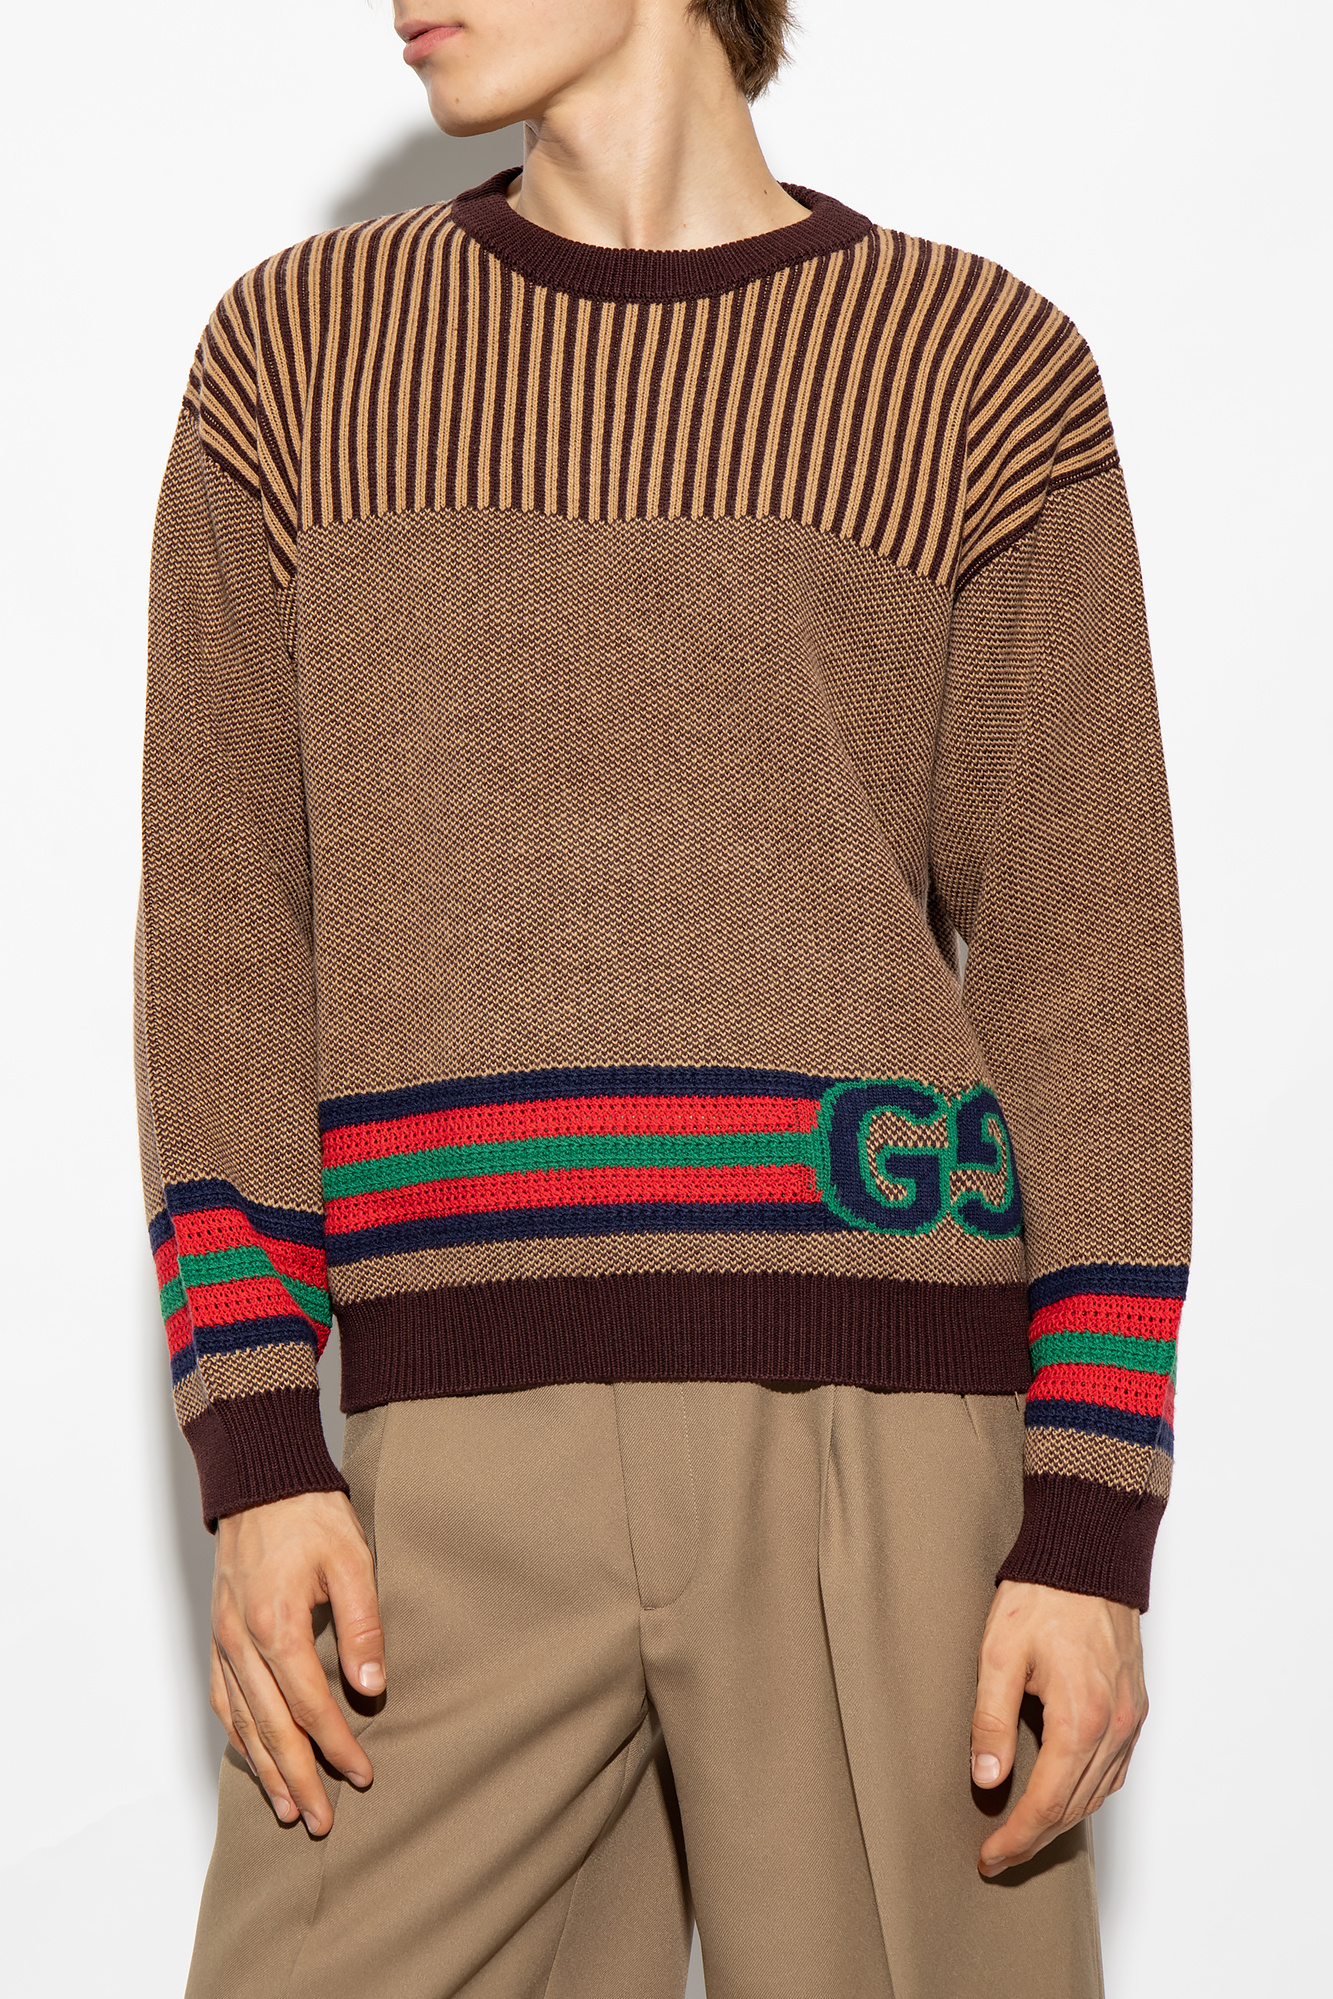 Gucci Sweater with logo